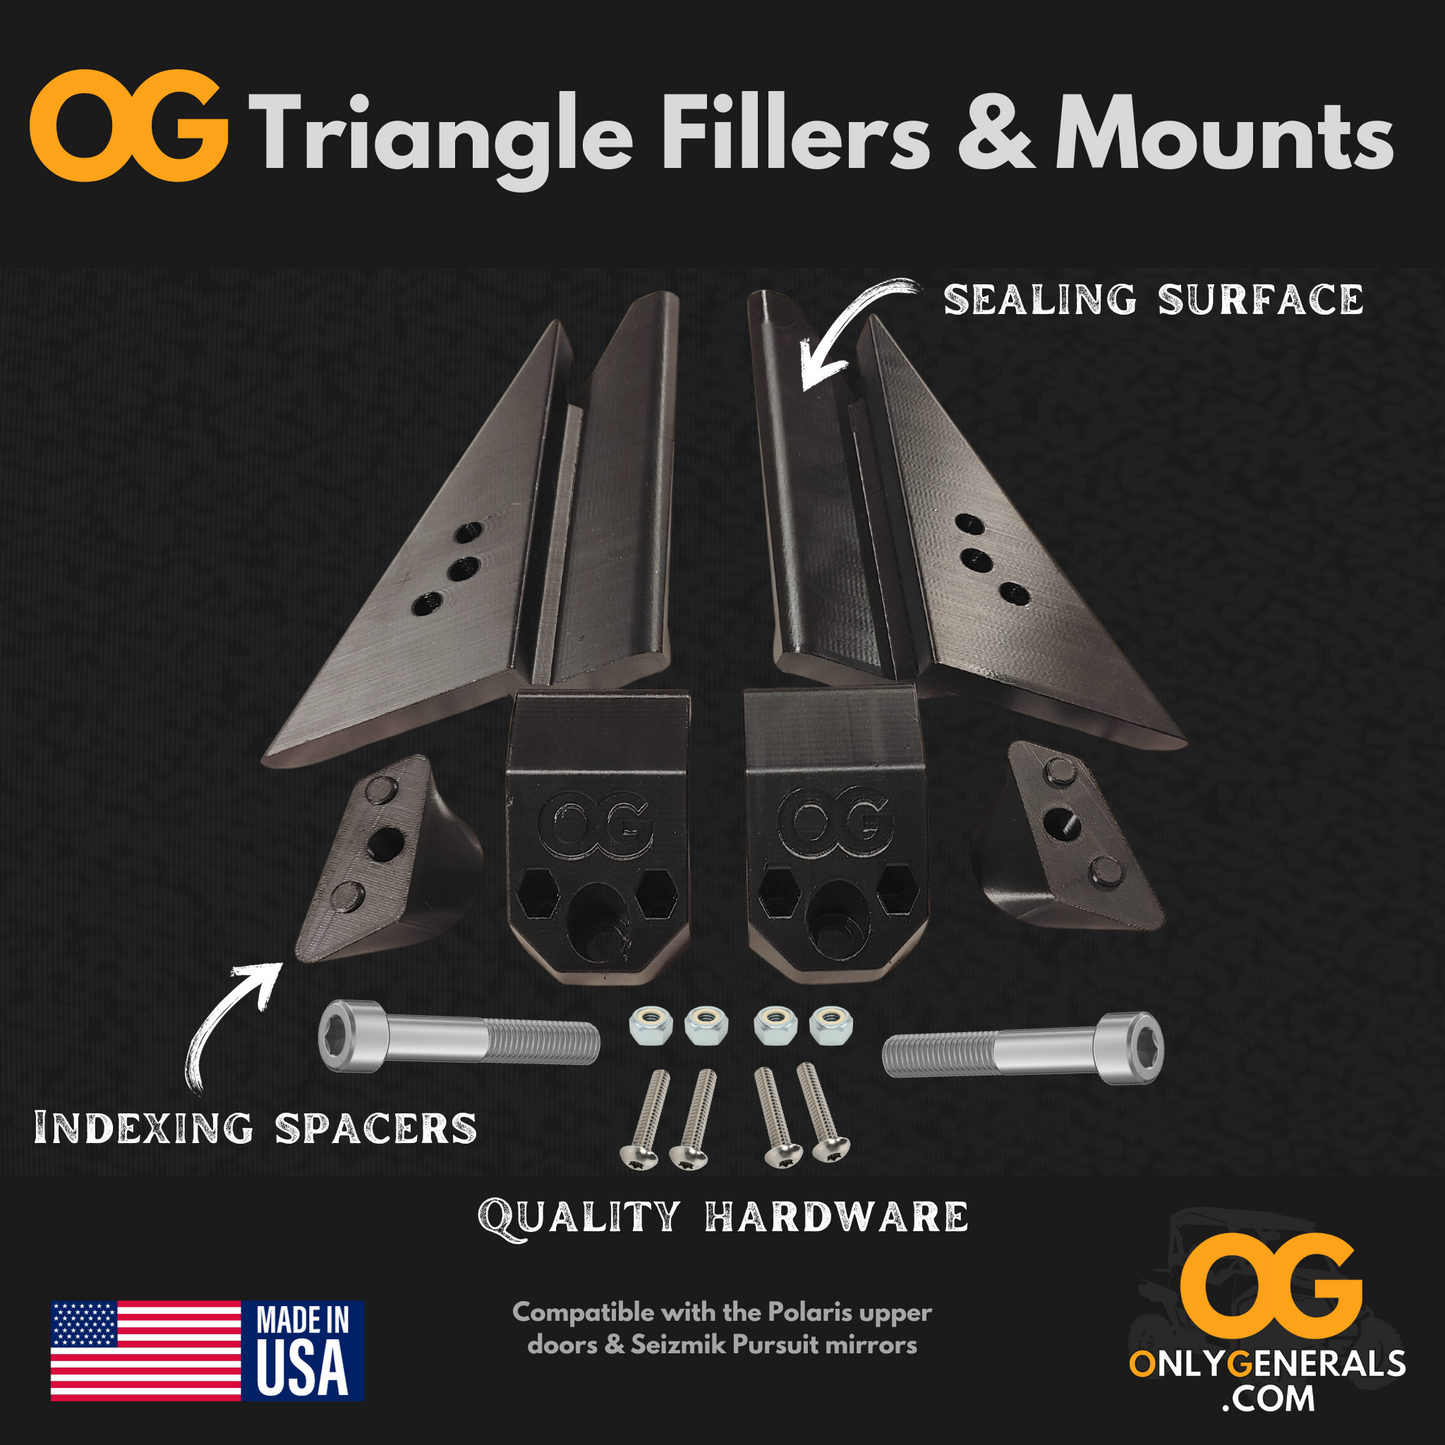 OnlyGenerals front filler triangles & mirror mount full kit laid out as a main banner